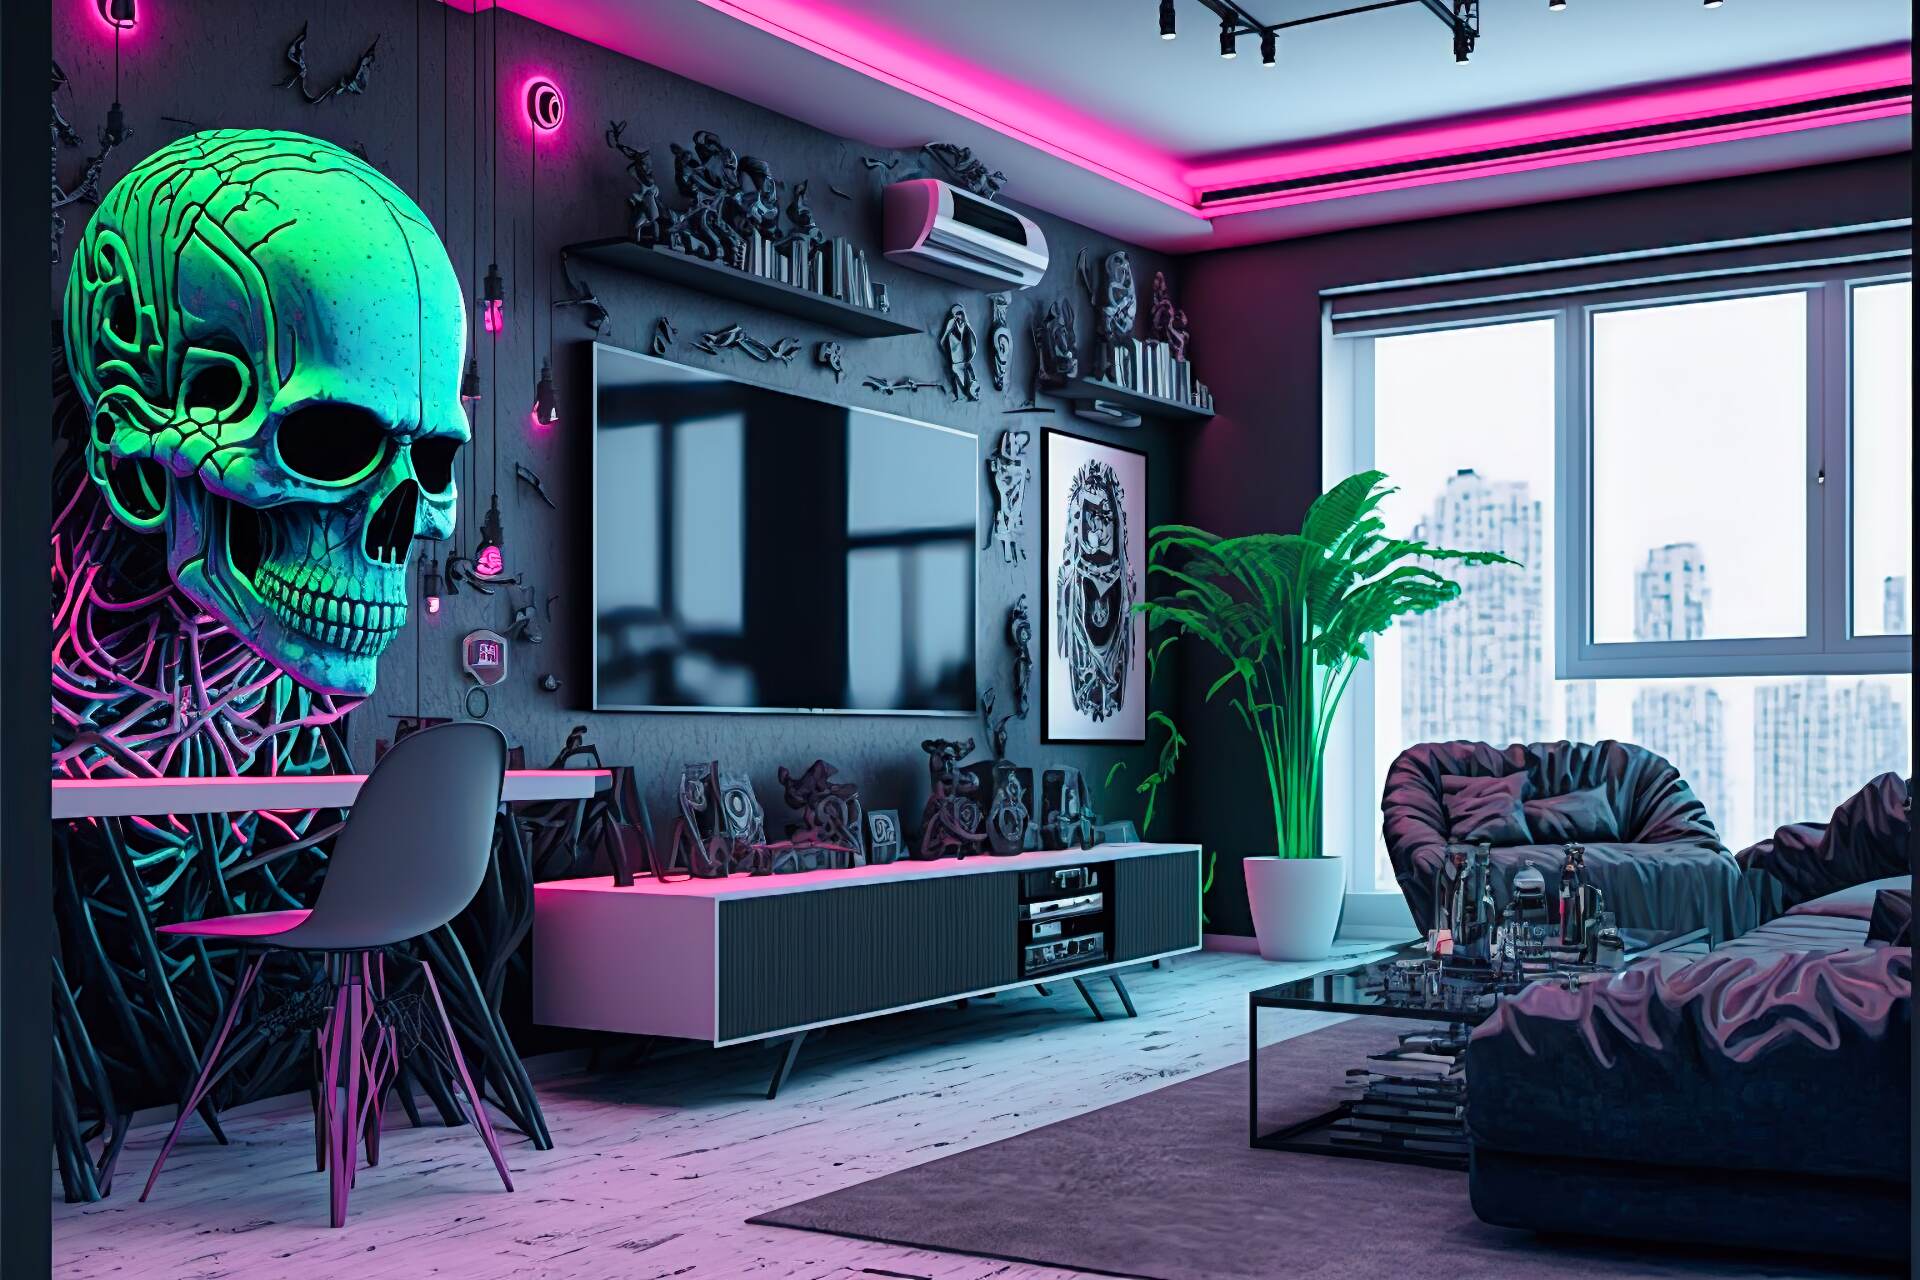 A Cyberpunk-Style Living Room With A Neon City Vibe. The Walls Are Painted Black And Adorned With Neon Lights In Various Shapes And Colors. The Furniture Is Made Up Of Sleek And Modern Pieces In A Monochromatic Color Scheme Of Black And White. A Large Flat Screen Tv Is Mounted On The Wall, Surrounded By More Neon Lights. A High-Tech Sound System And A Futuristic Gaming Console Complete The Look.